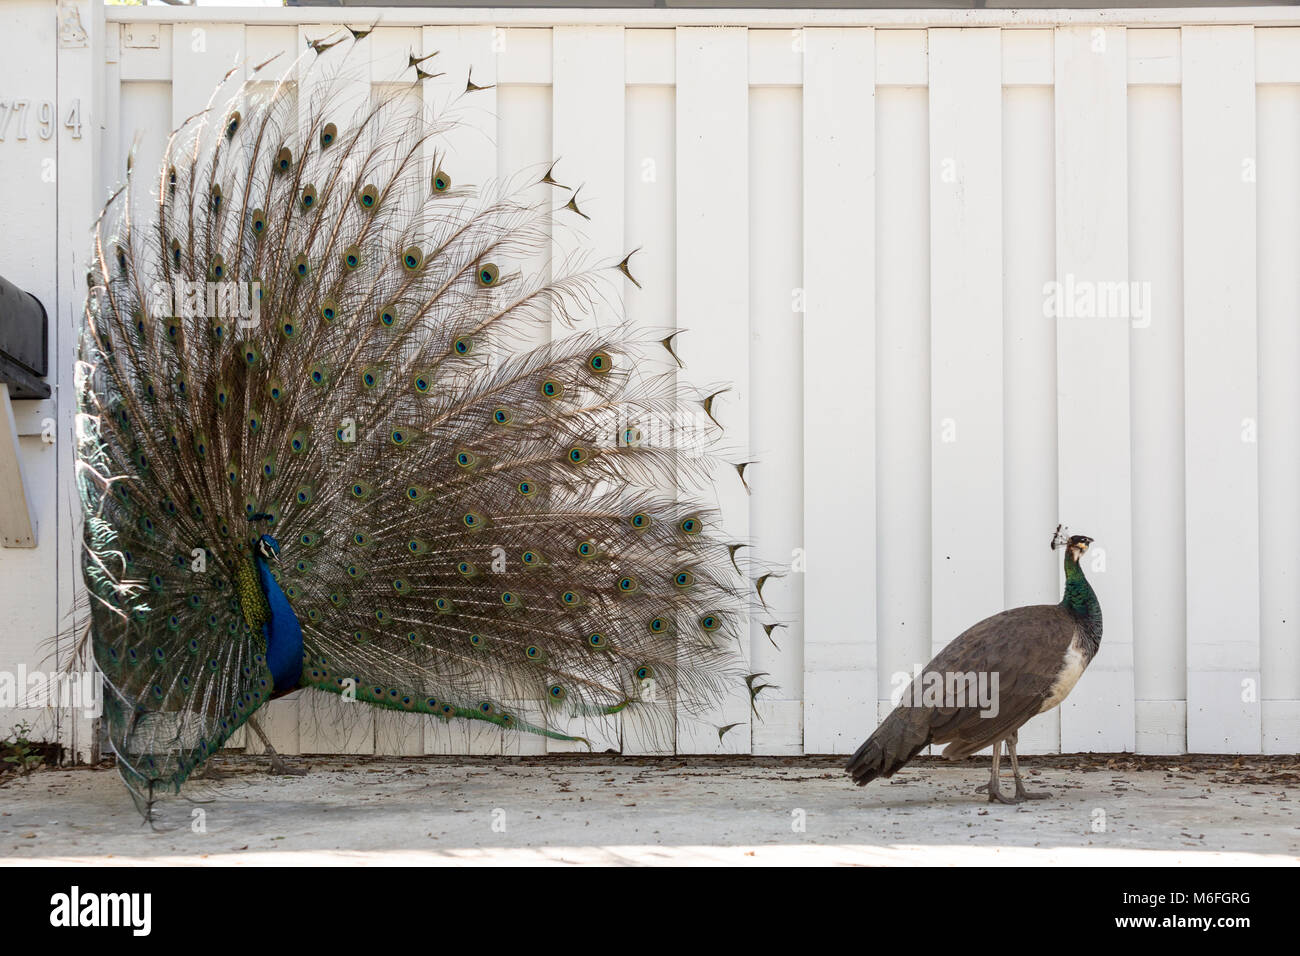 03 March 2018 - Coconut Grove, Flordia, USA: A Peacock puts on a display for a passing Peahen during mating season on a residential street Stock Photo